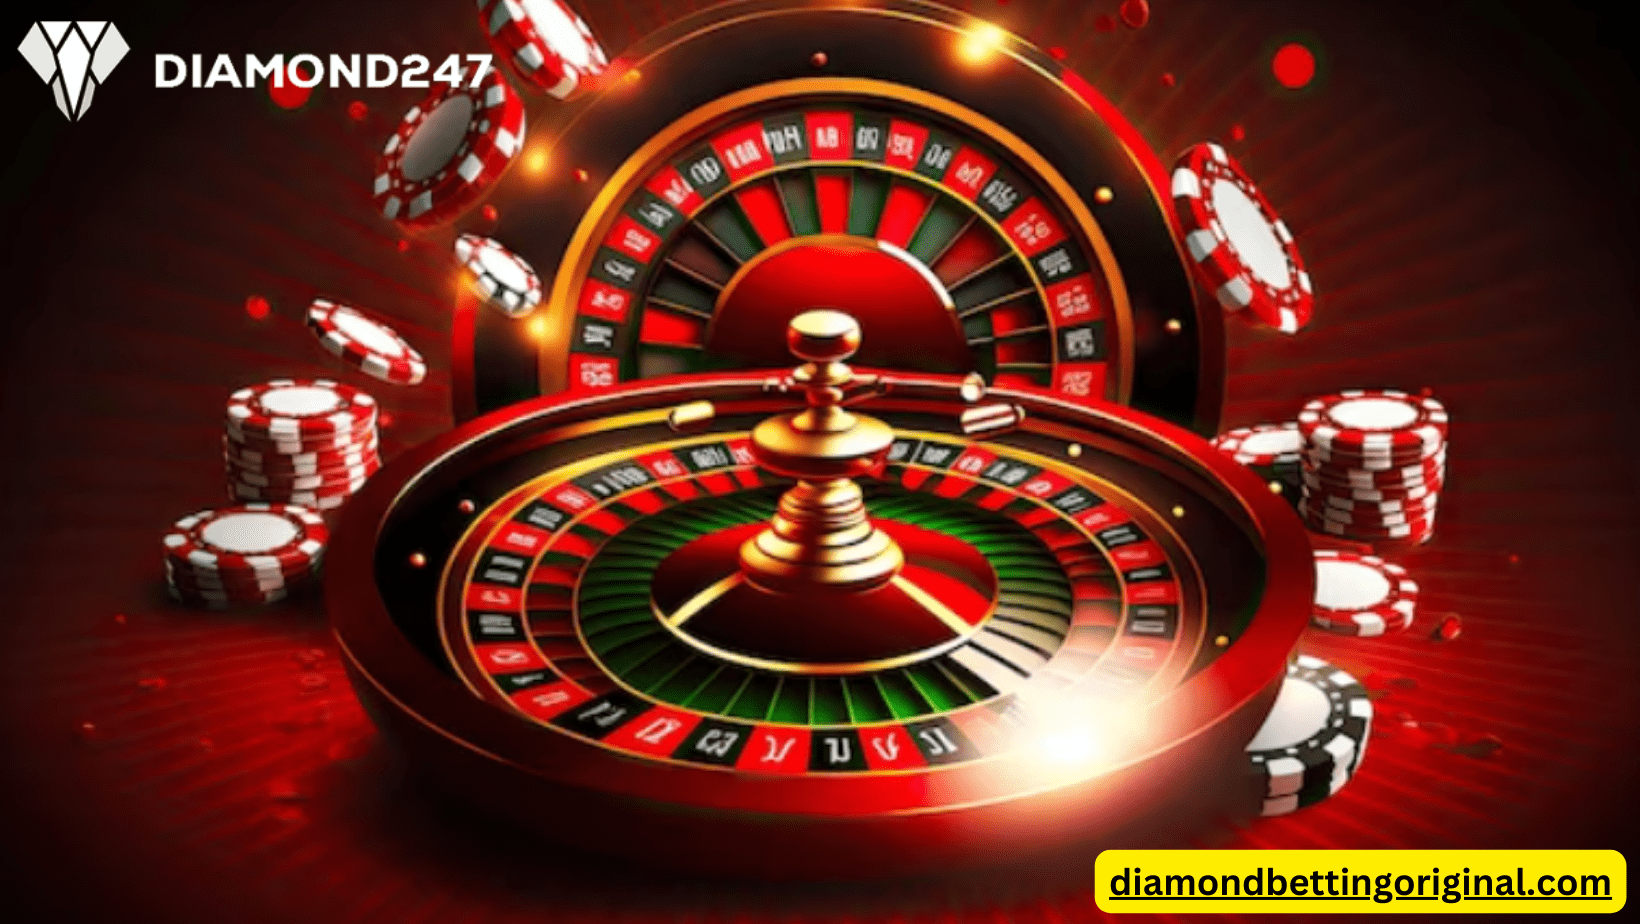 Top 10 Online Casino Games in India to Earn Real Money in Diamond Exch